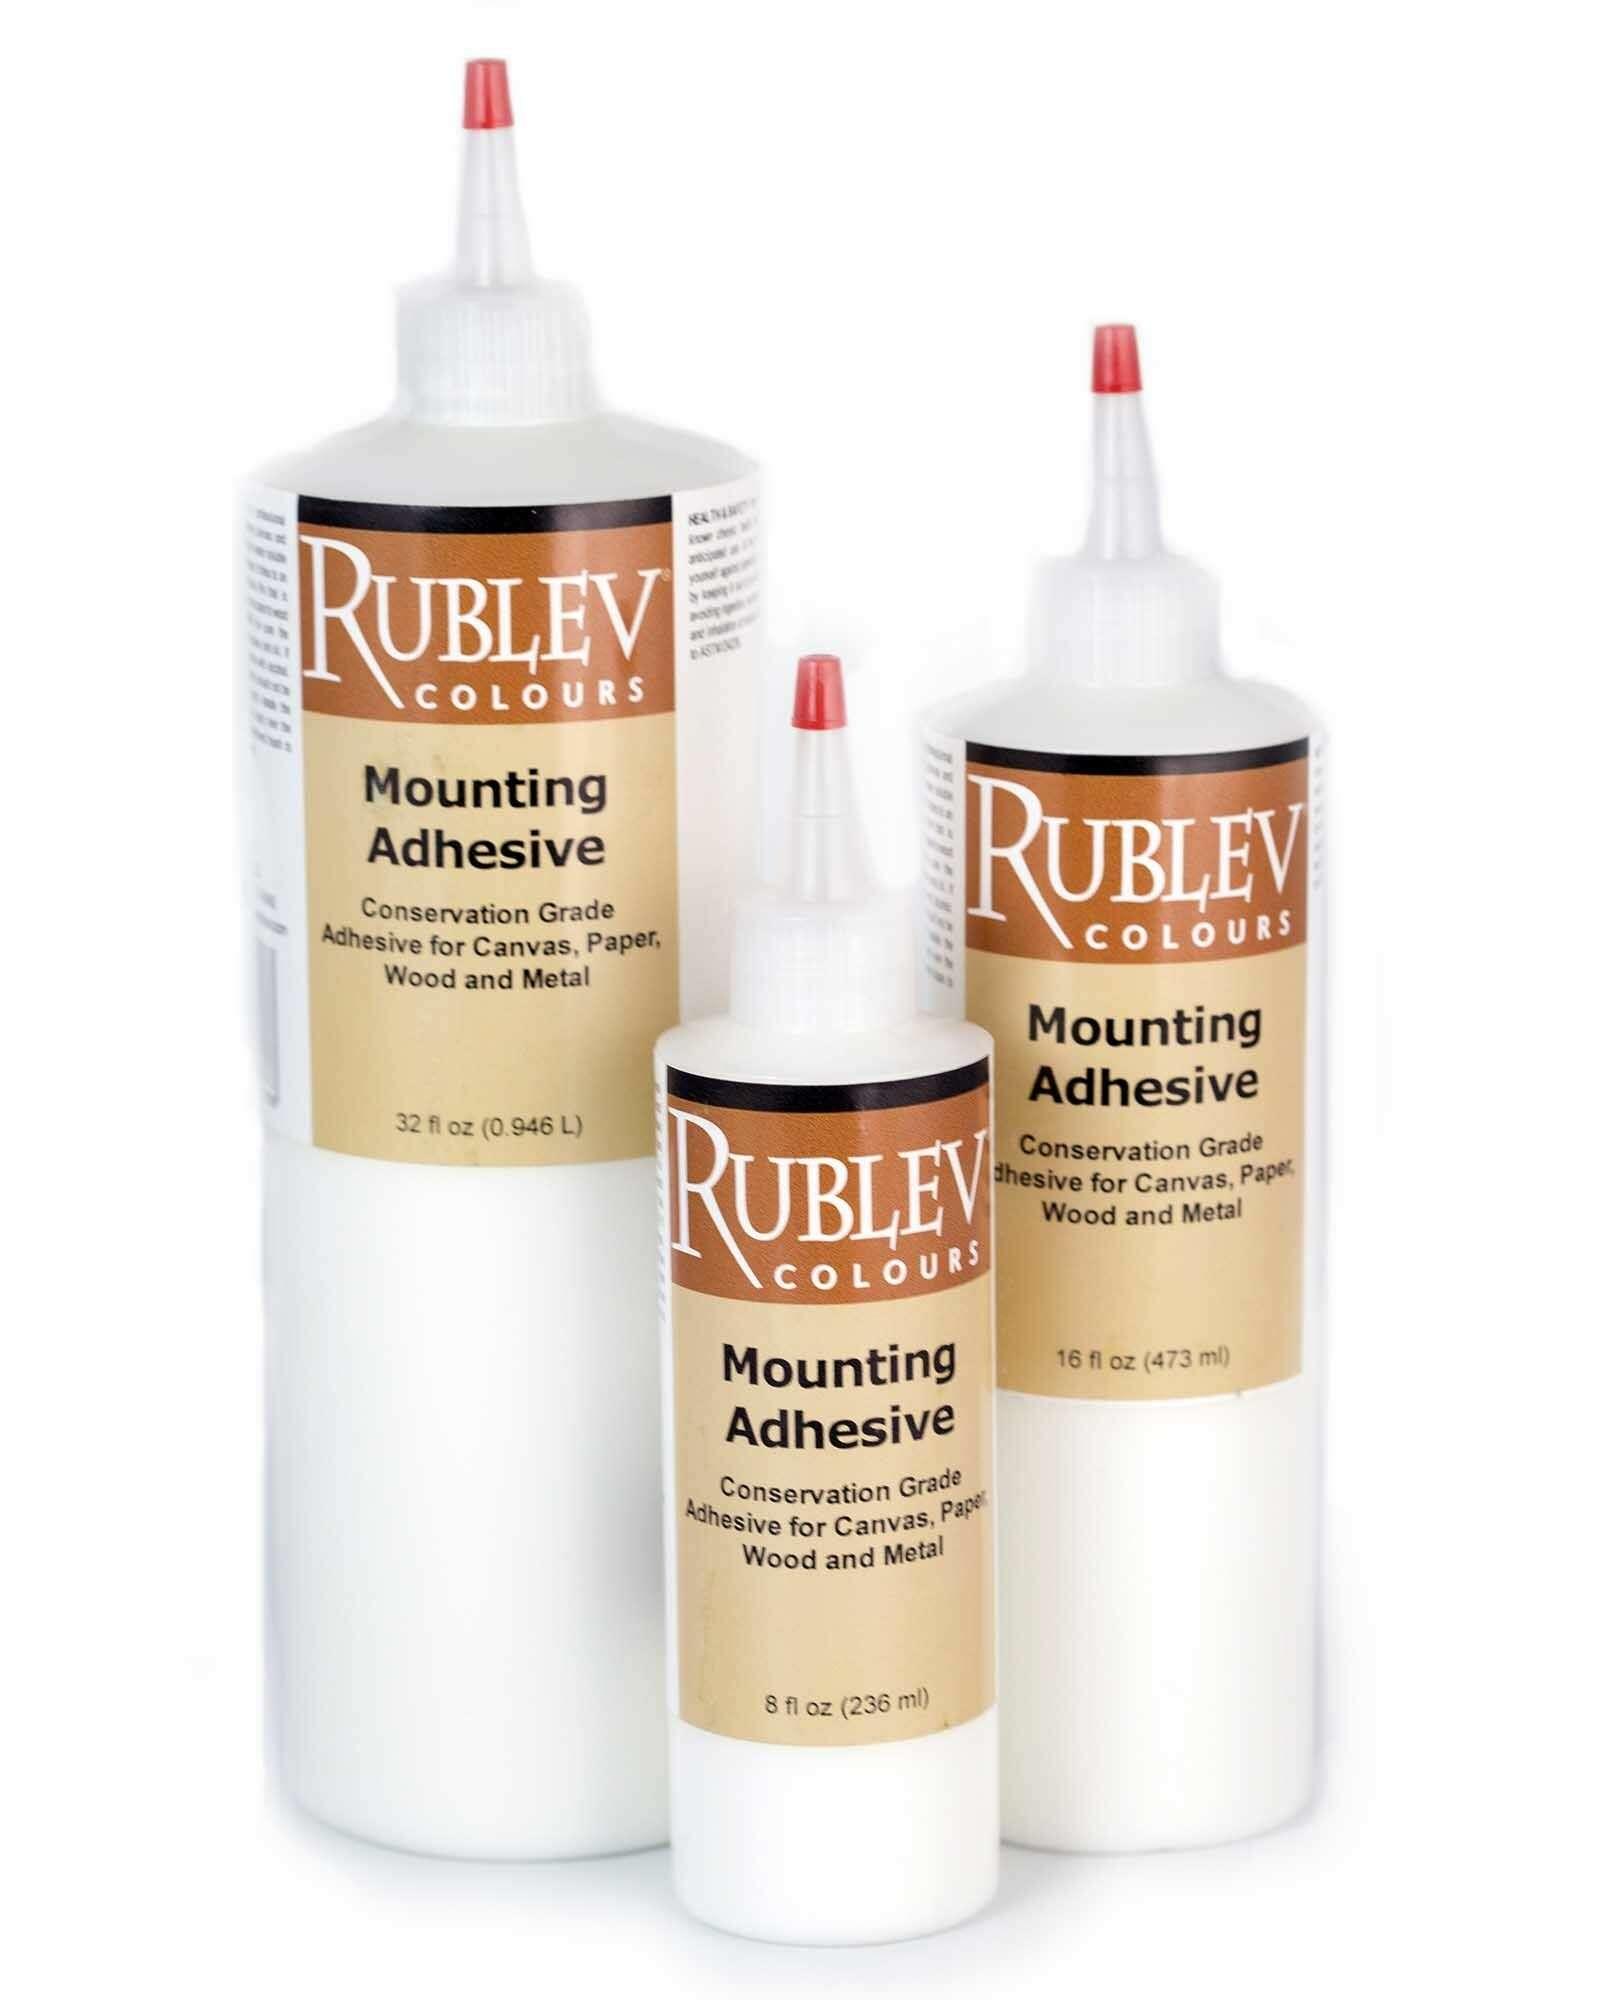 Rublev Colours Mounting Adhesive